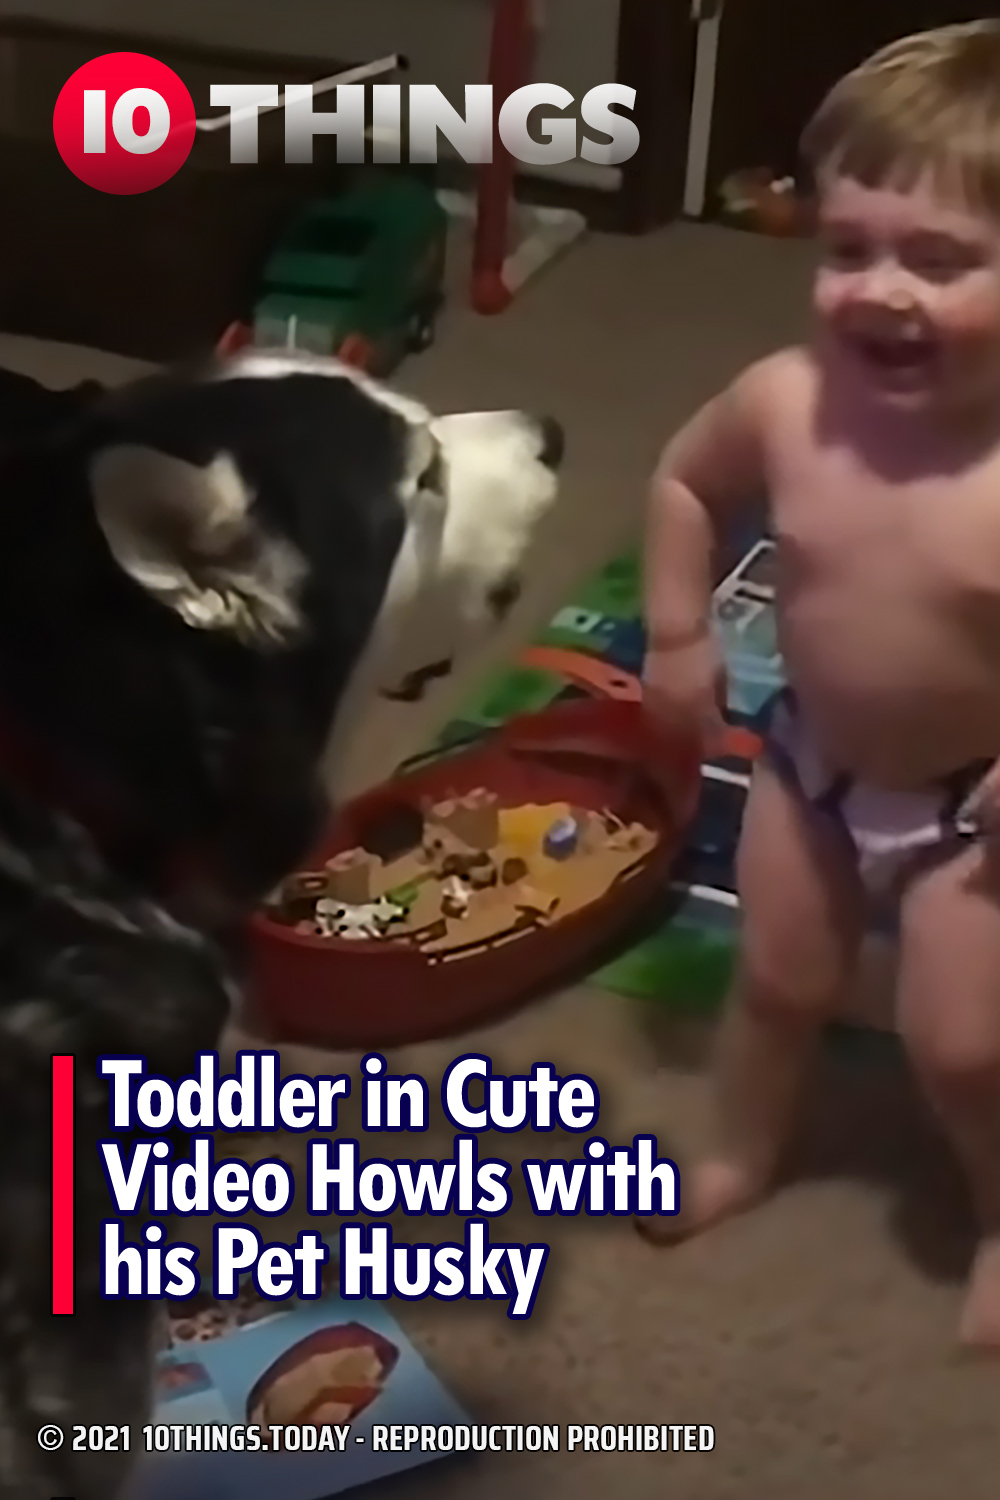 Toddler in Cute Video Howls with his Pet Husky